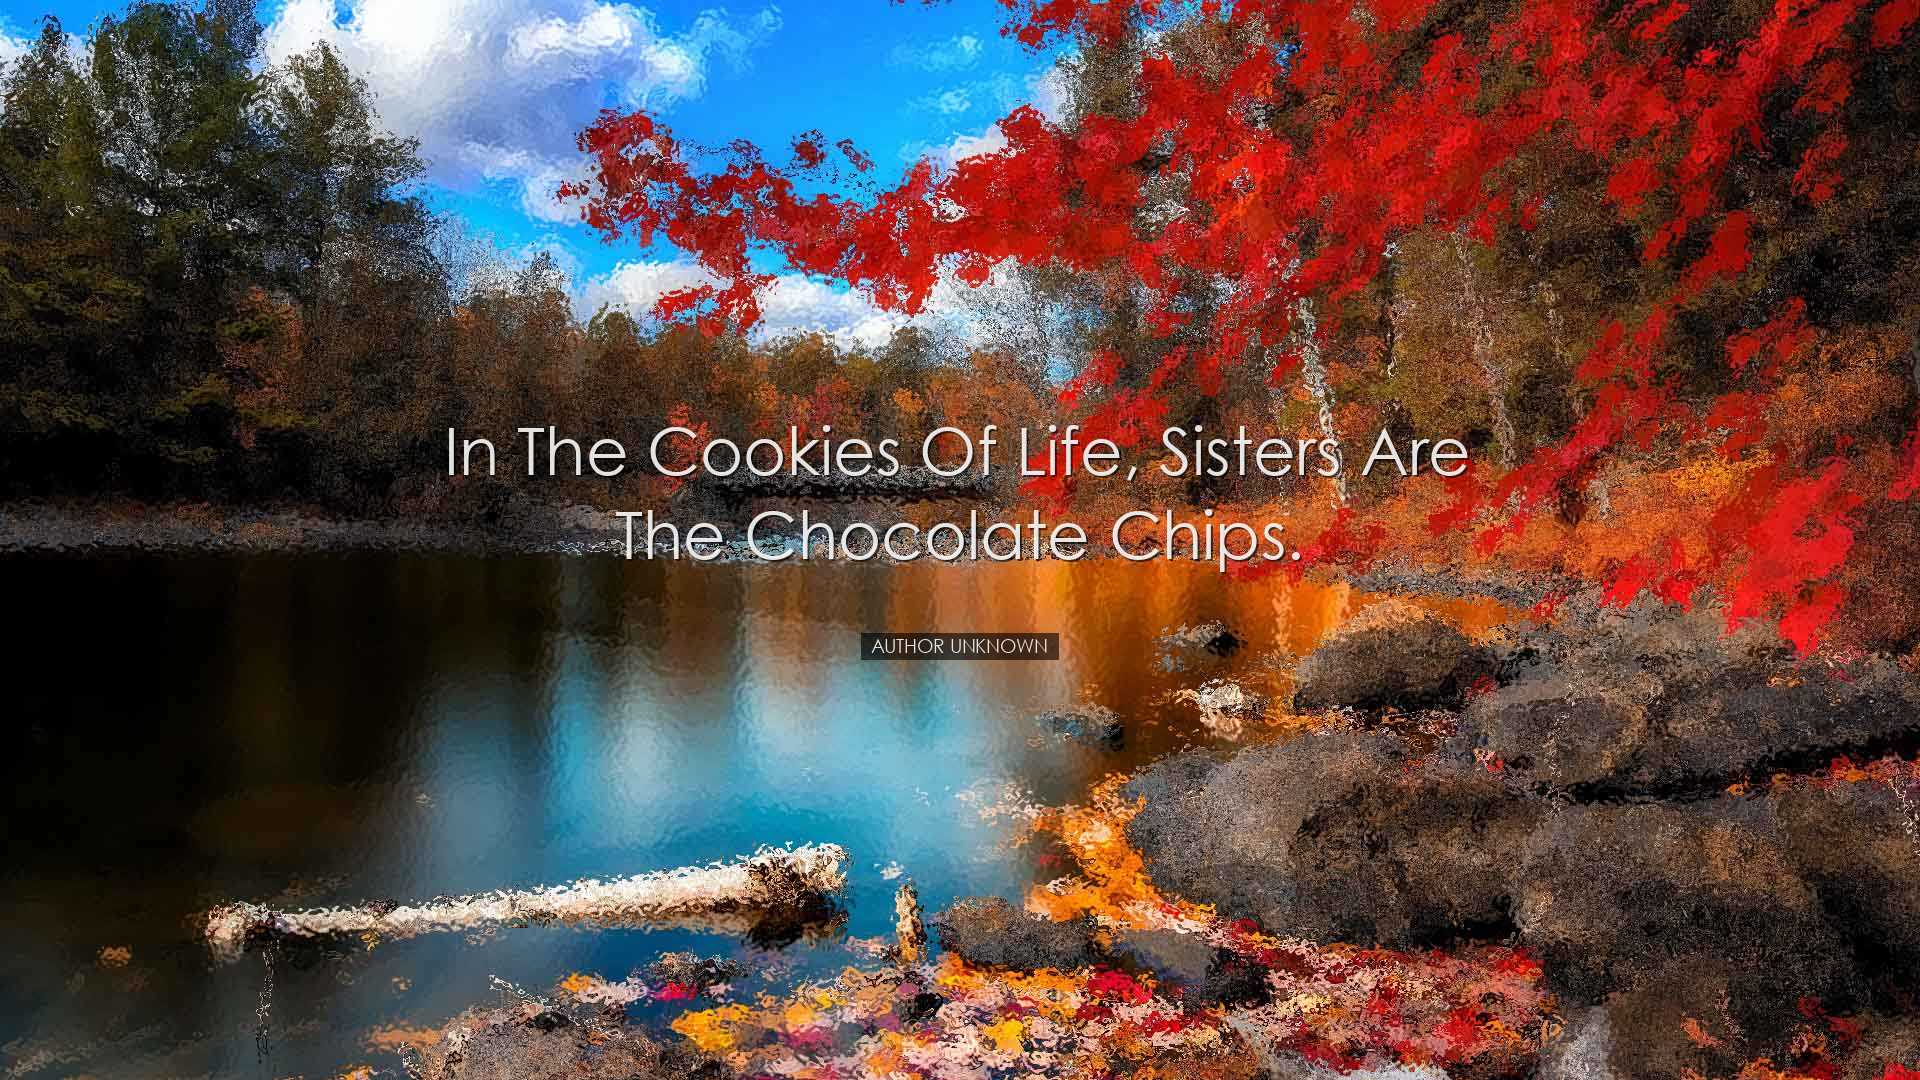 In the cookies of life, sisters are the chocolate chips. - Author